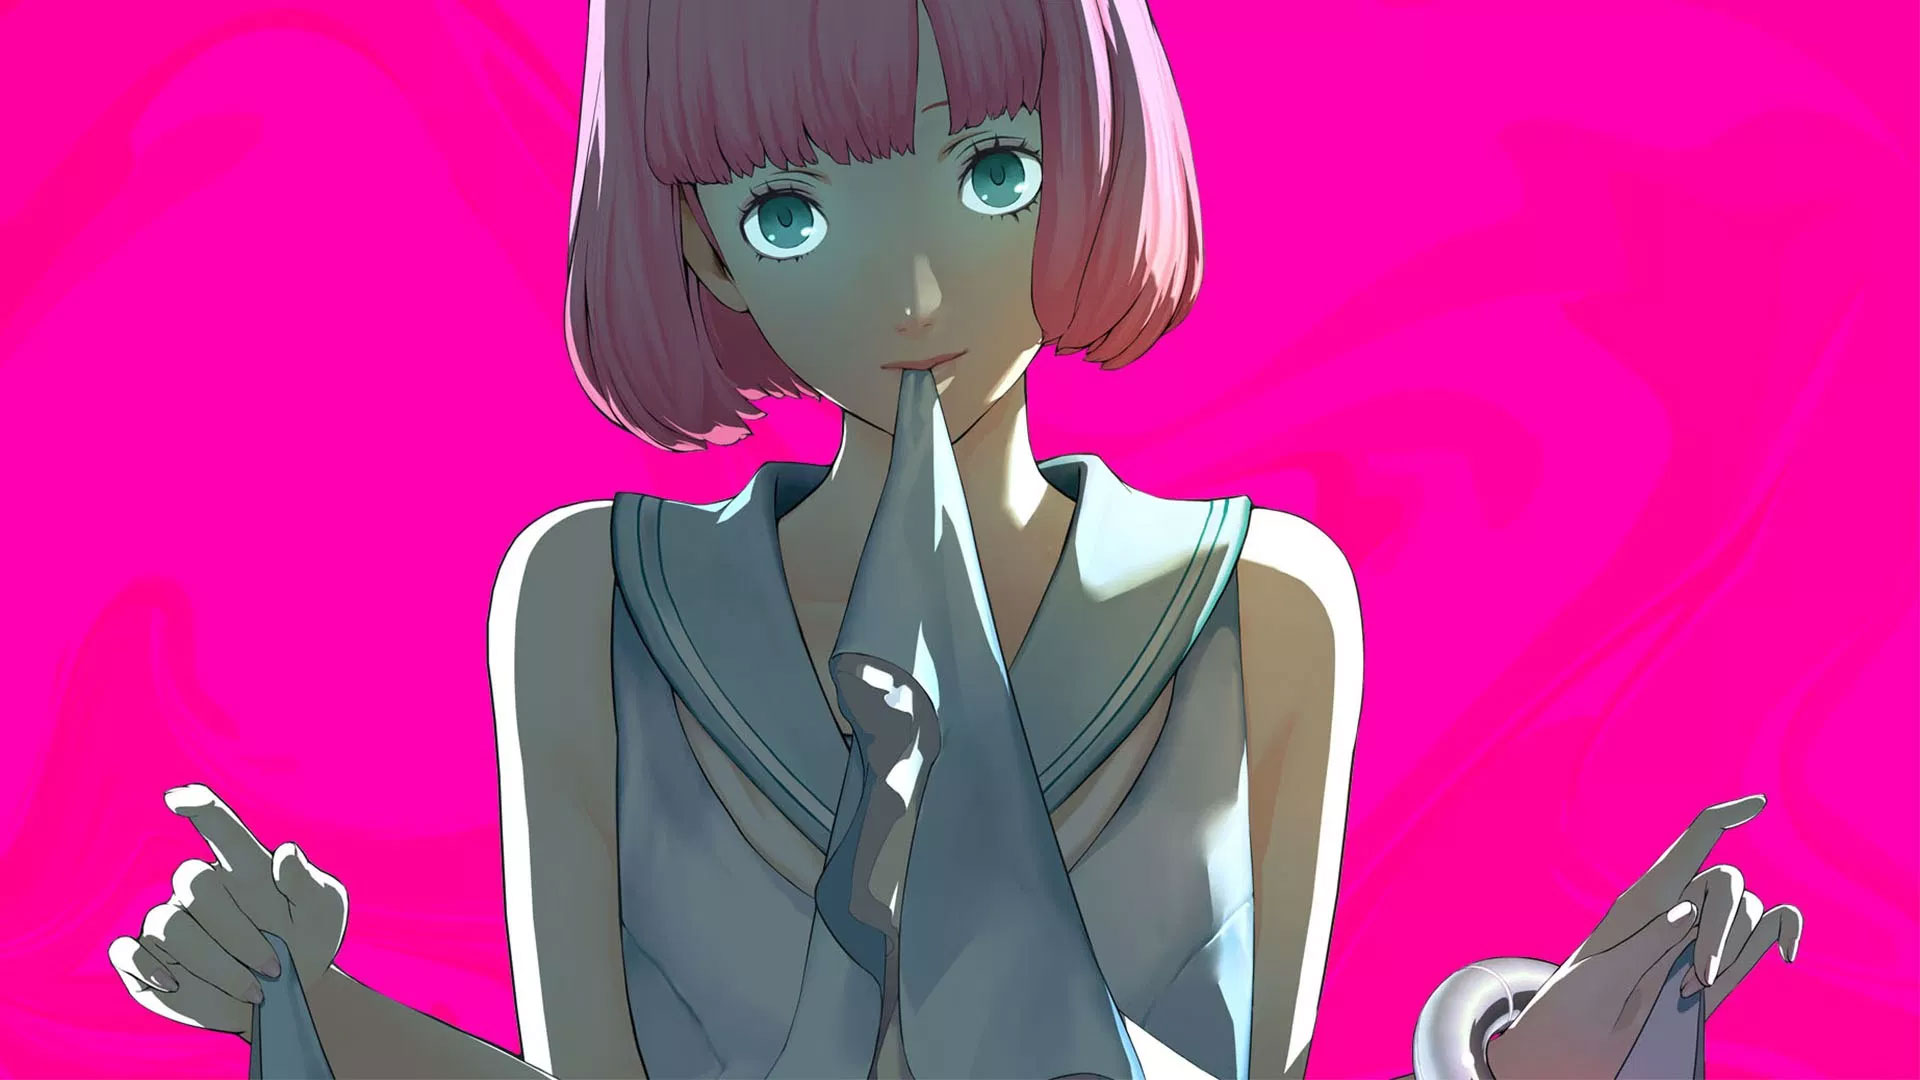 Catherine Wallpapers